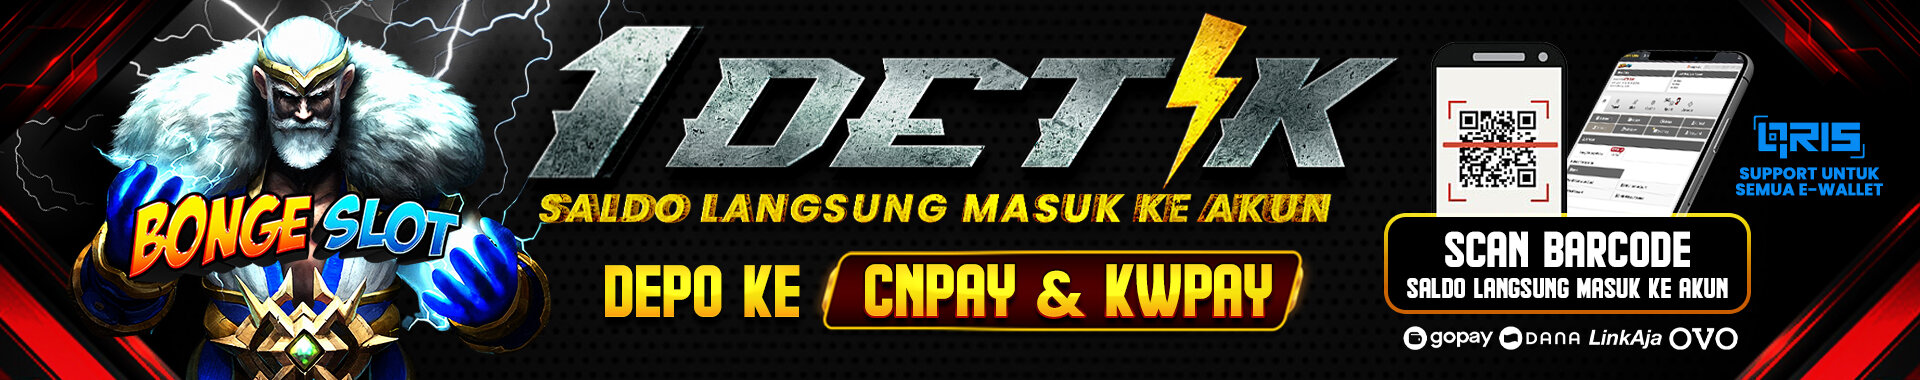 fitur depo cnpay dan kwpay